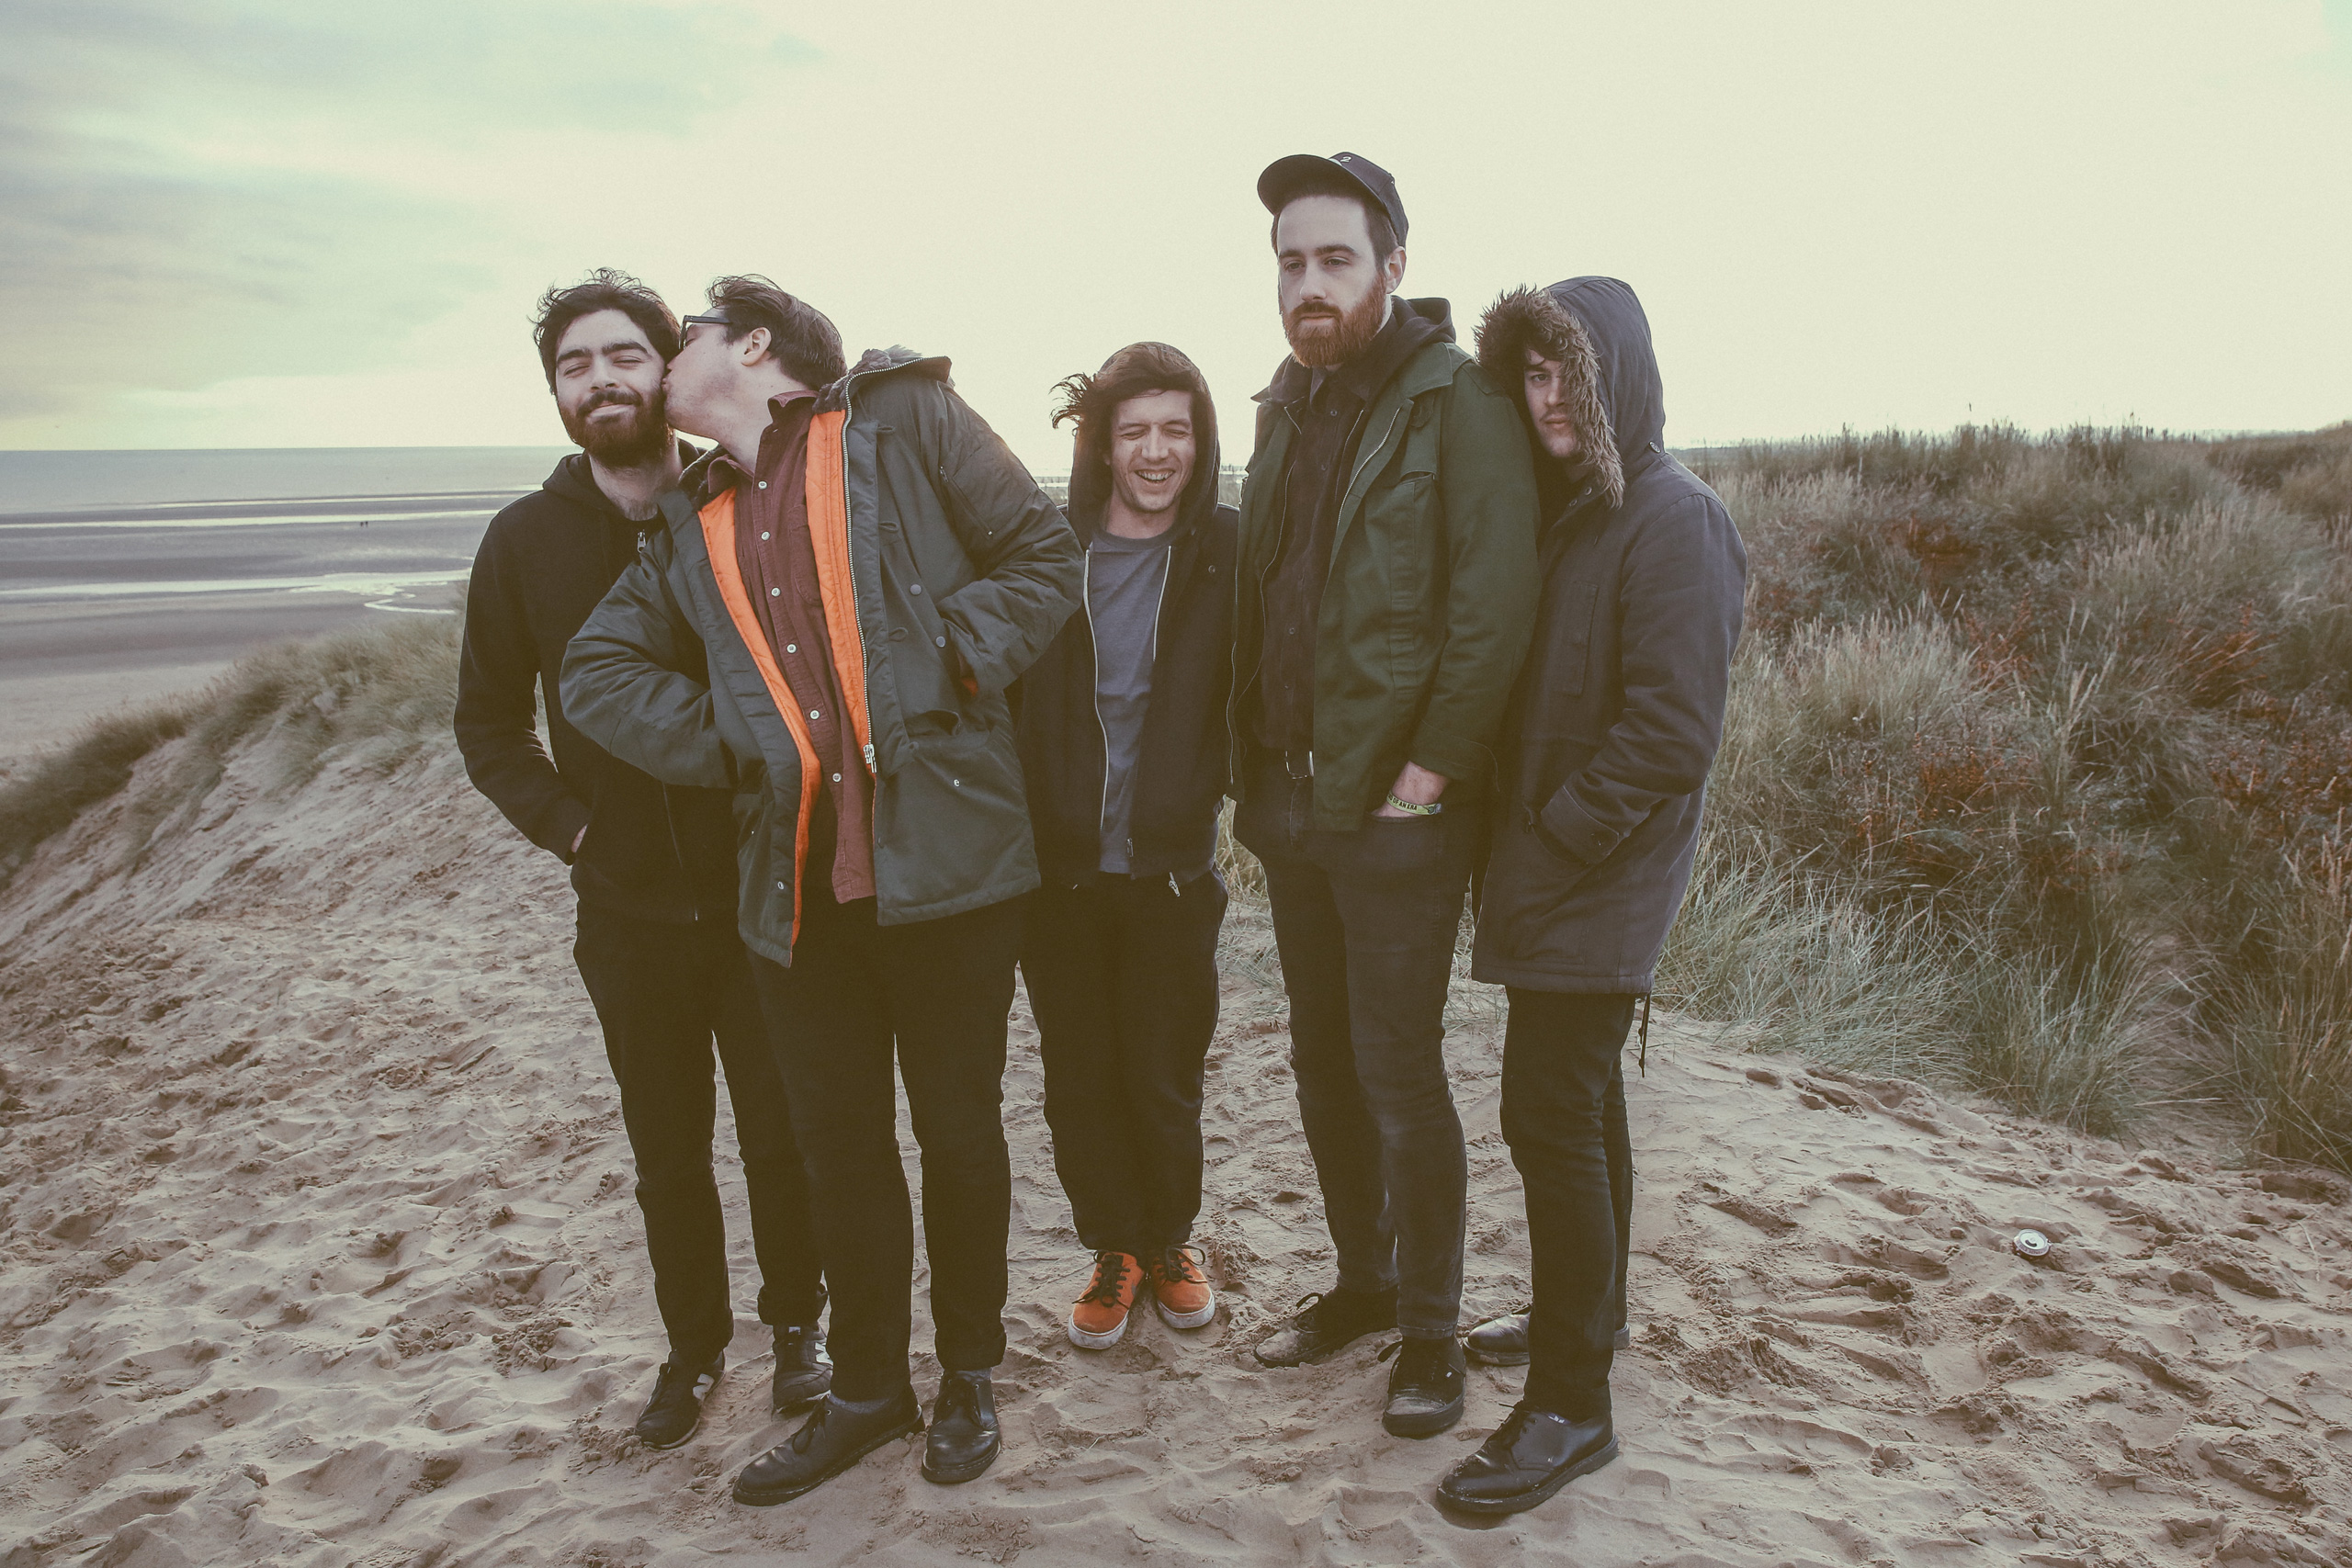 Hookworms made our favourite album of the year while challenging